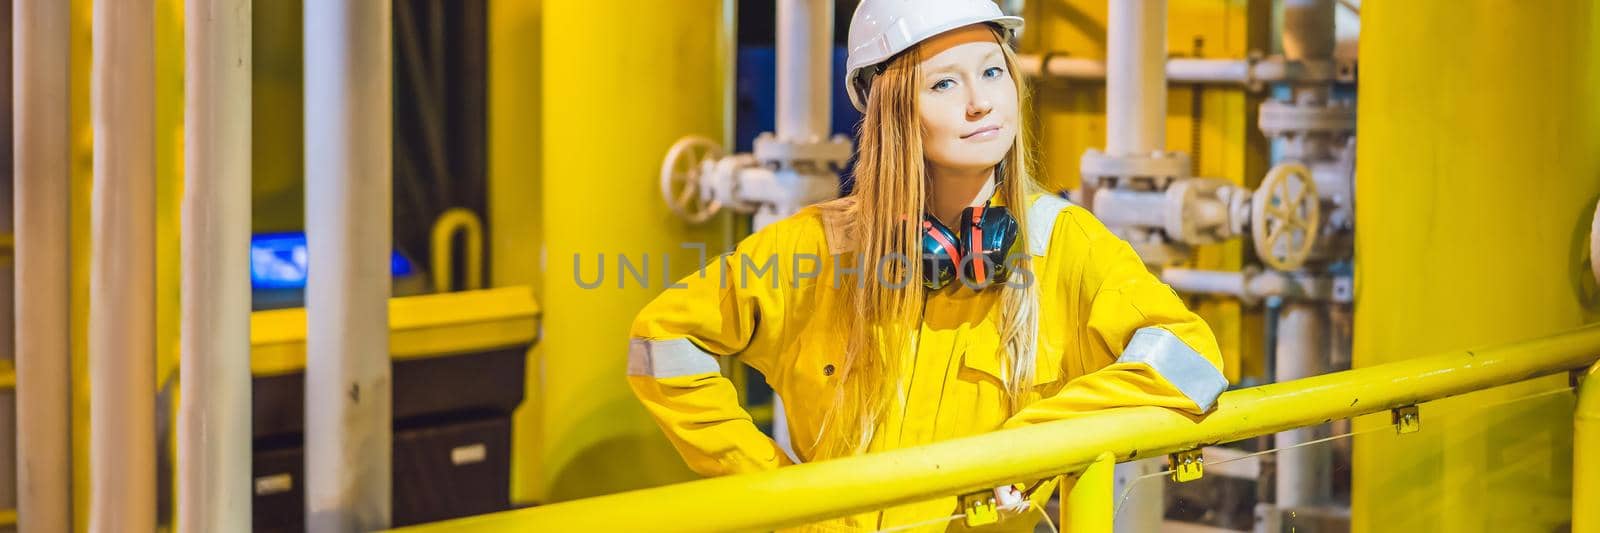 Young woman in a yellow work uniform, glasses and helmet in industrial environment,oil Platform or liquefied gas plant. BANNER, LONG FORMAT